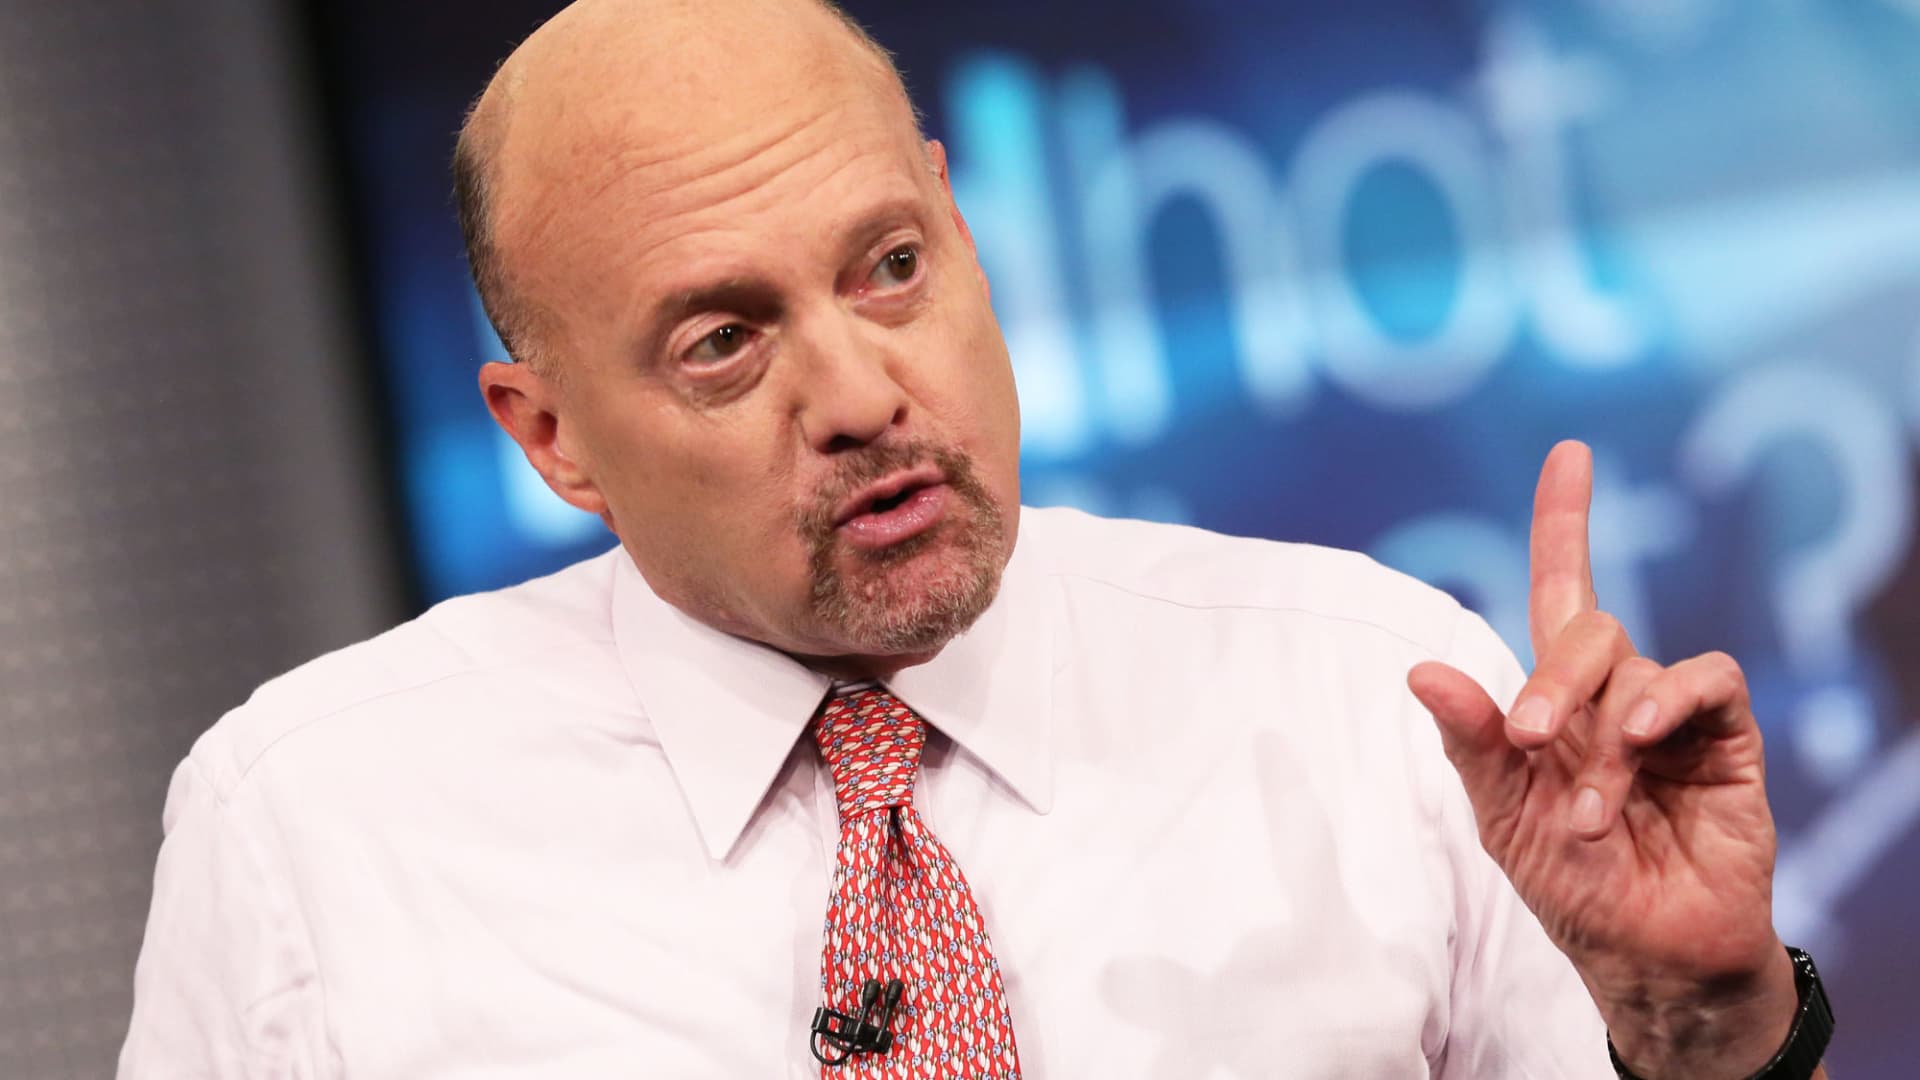 Jim Cramer says investors should focus less on how China affects American stocks